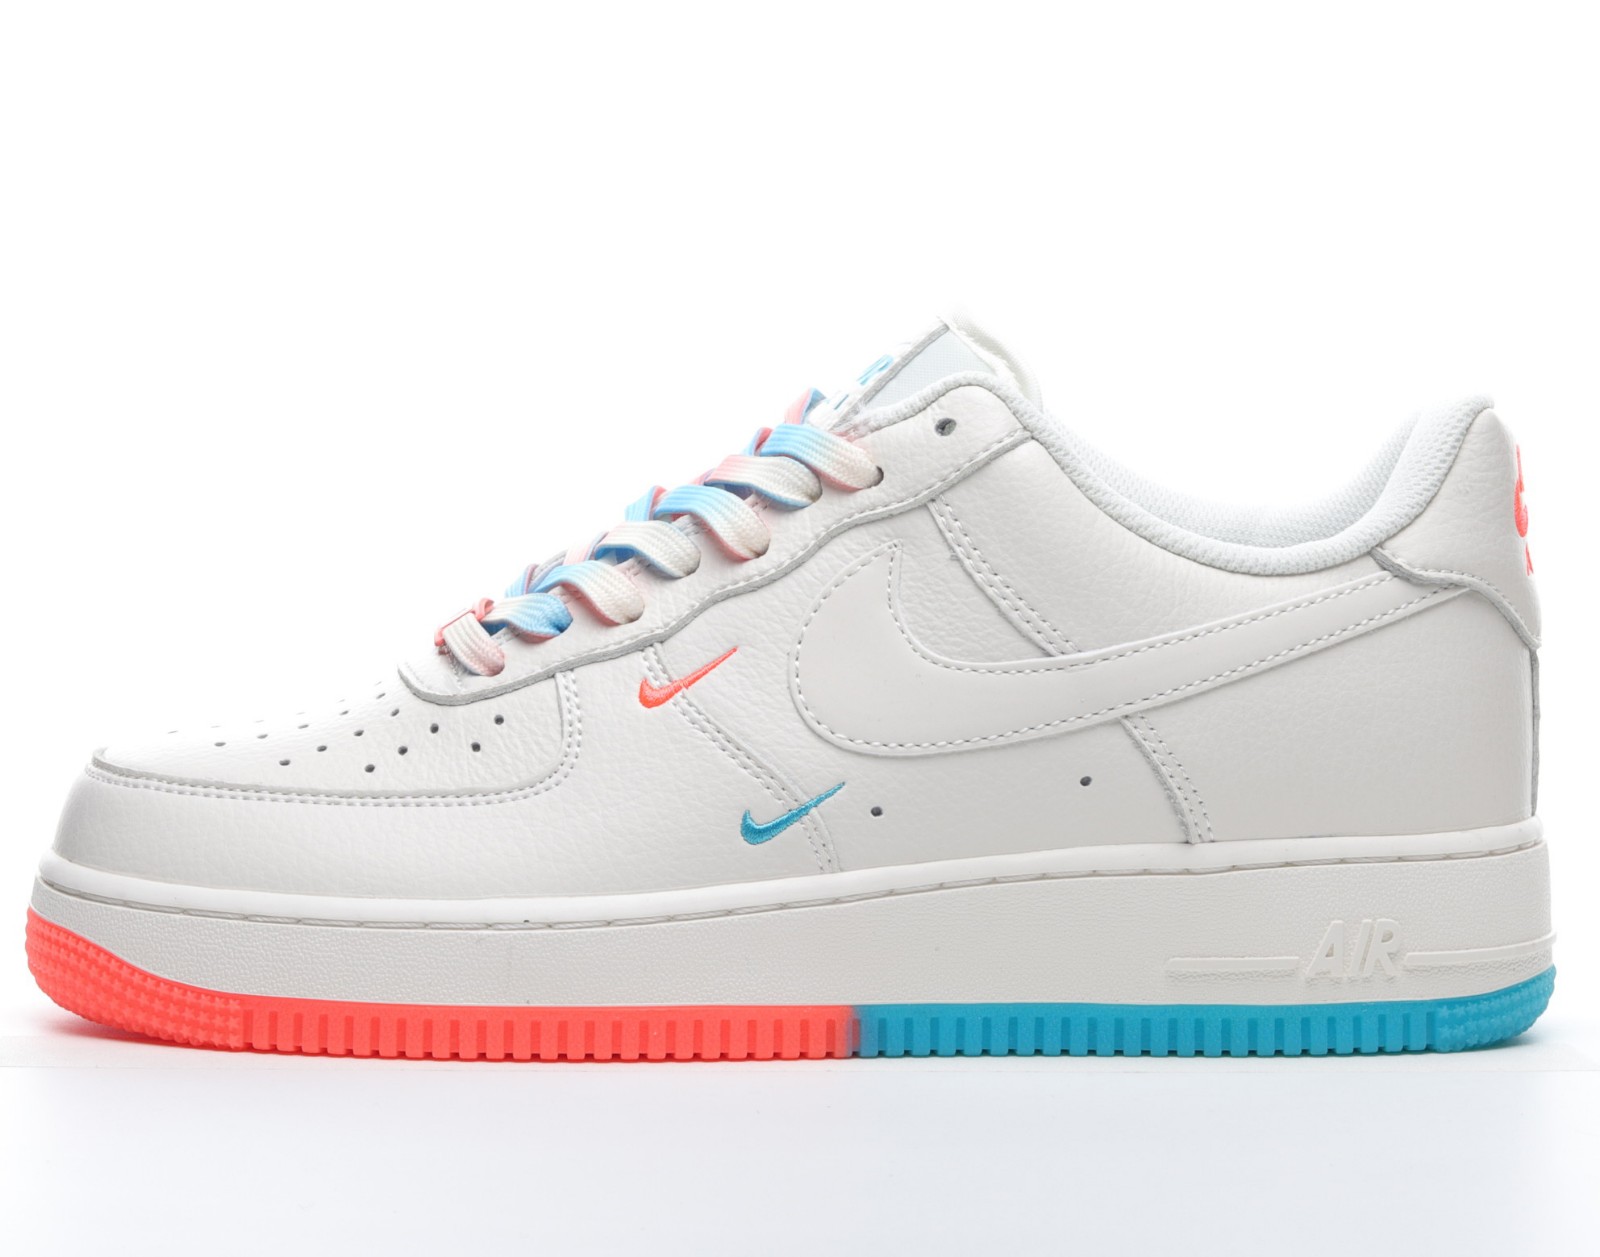 Drastisch Speels Bekend StclaircomoShops - 2021 Nike Air Force 1 07 Low SU19 Rice White Orange Blue  CT1989 - 103 - nike shox shoes for girls 2018 white pages free